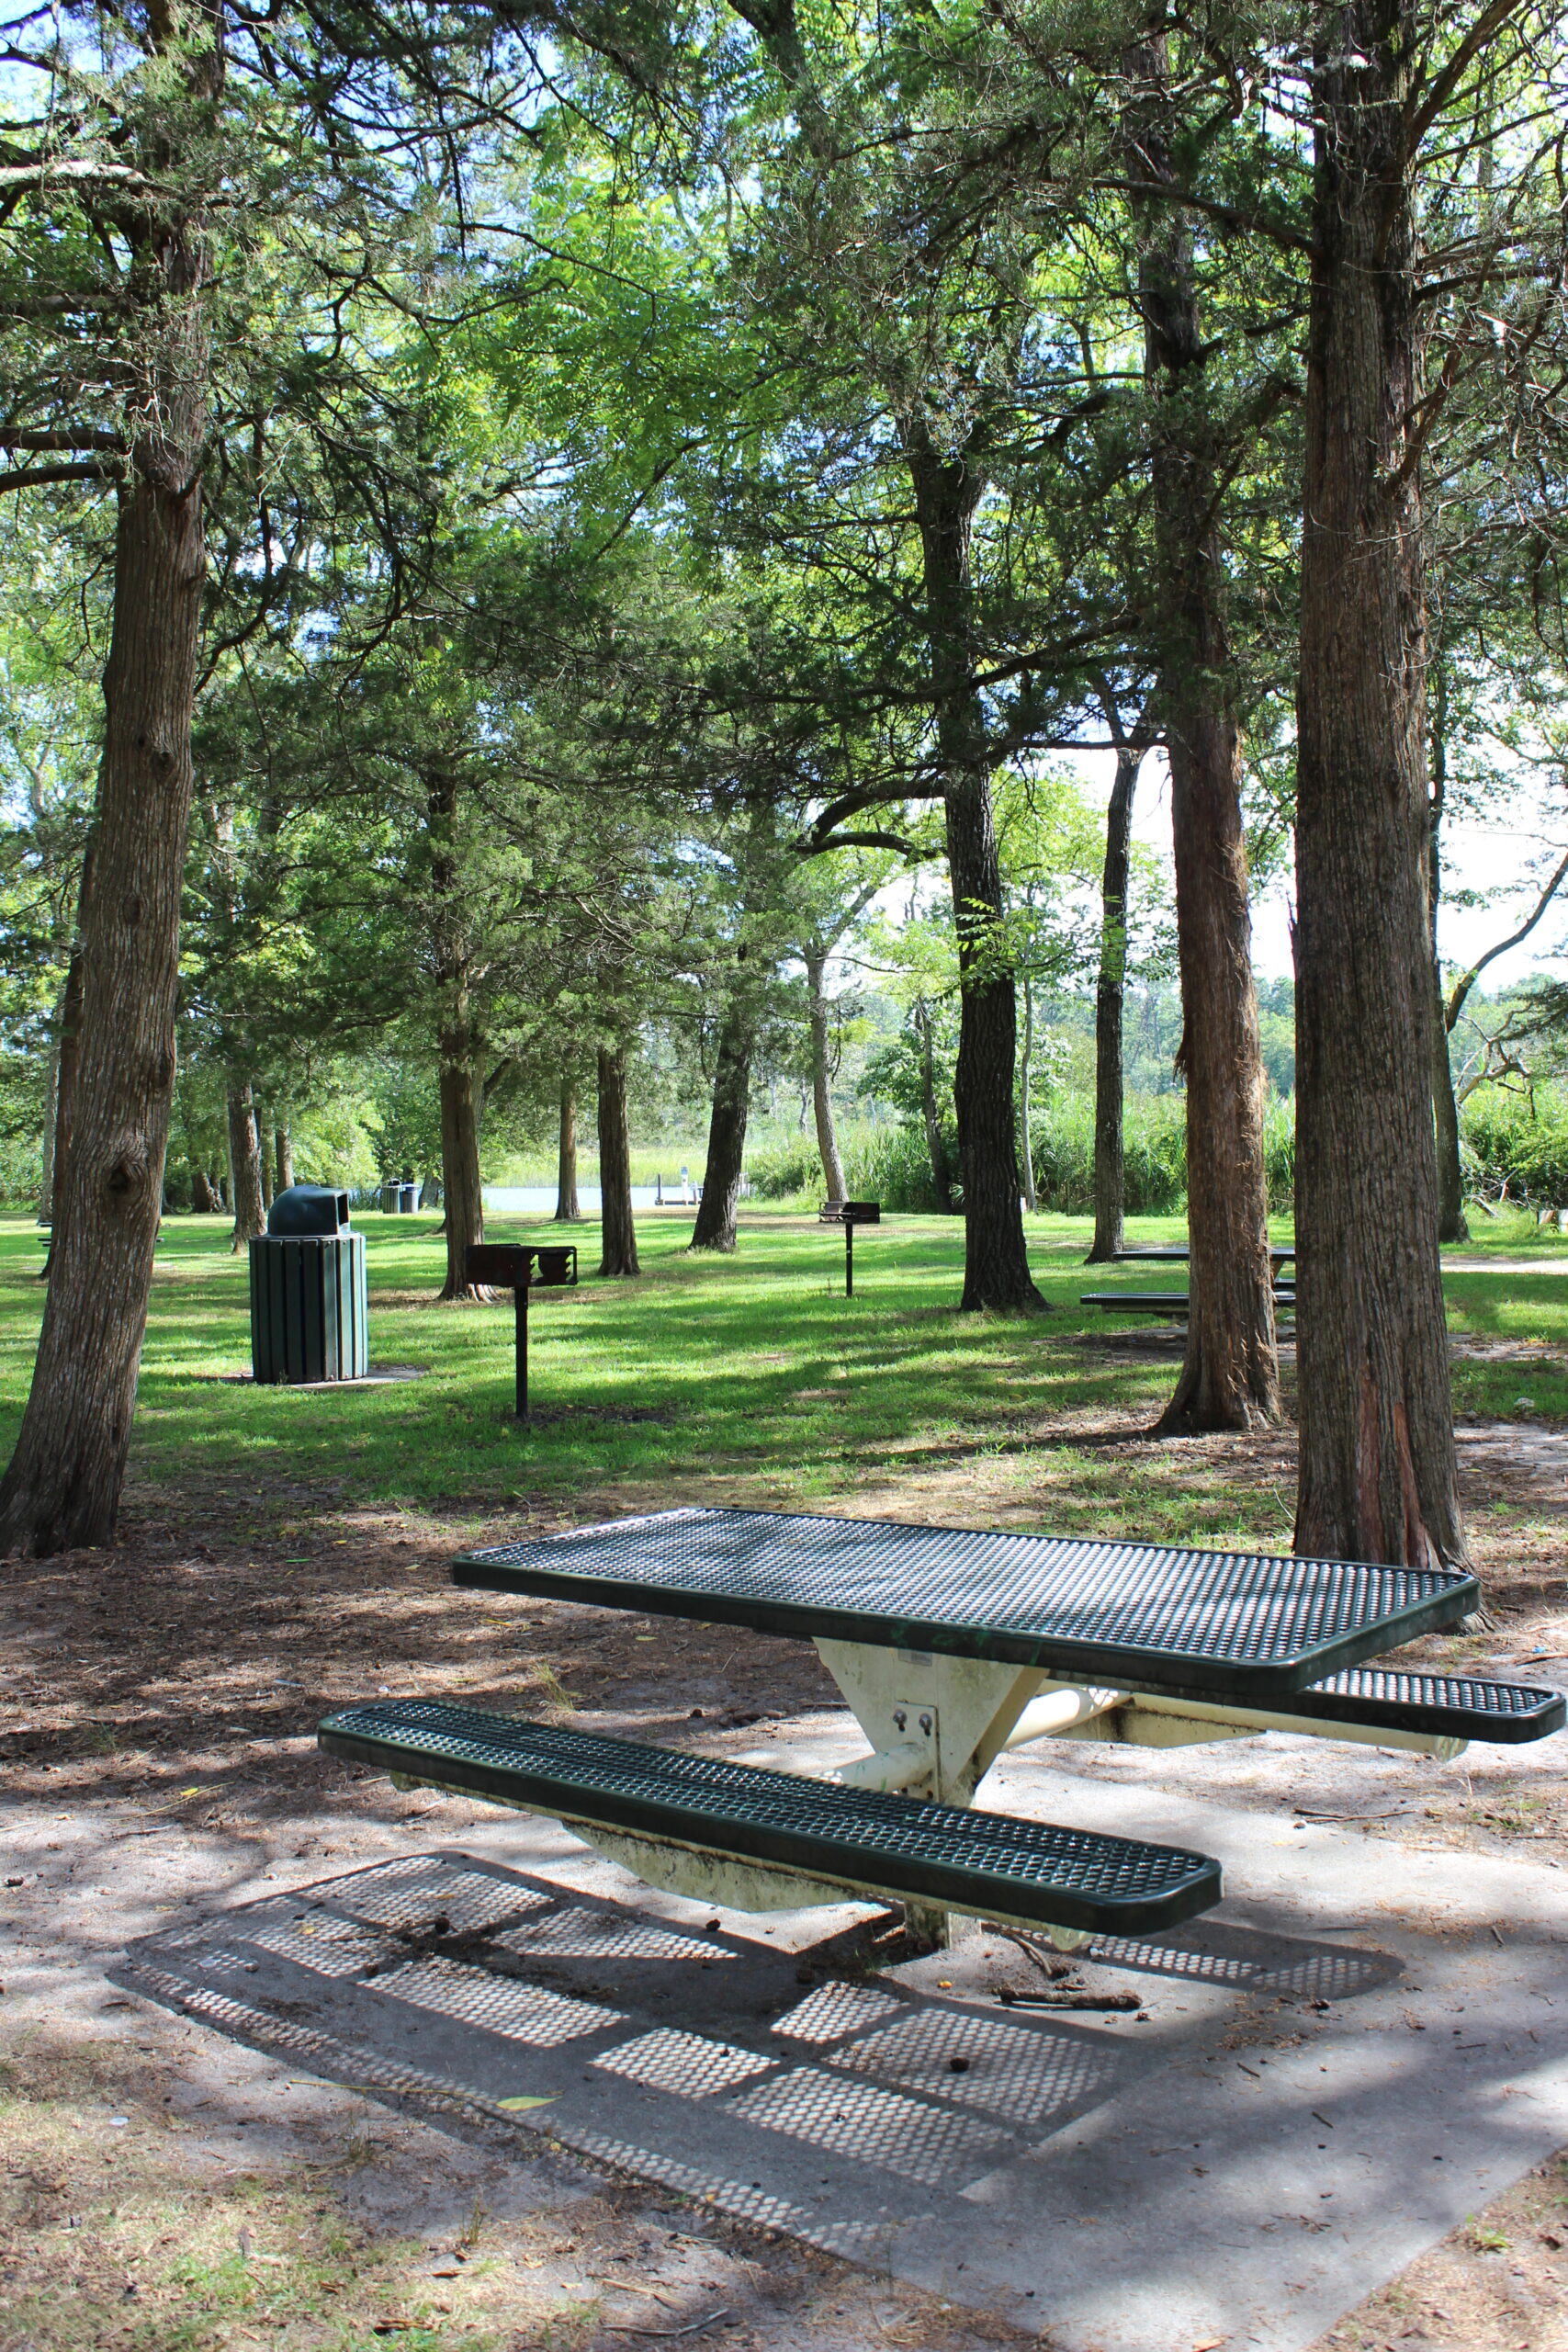 Back Estell Manor Park Playgrounds in Mays Landing NJ - Picnic Table under trees and view of water